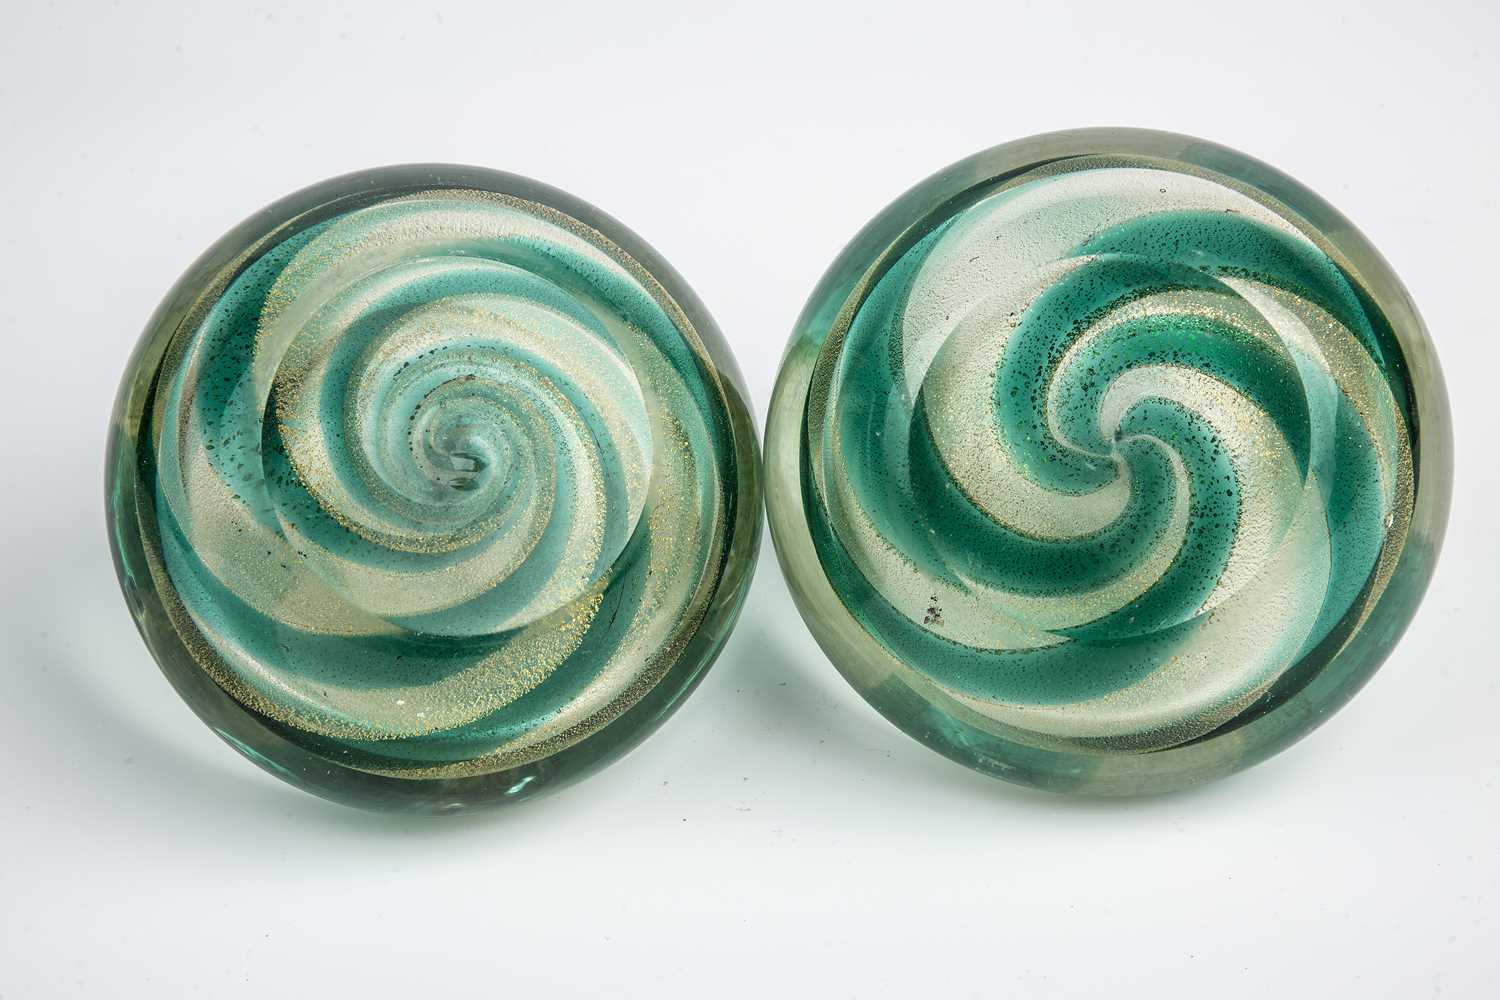 Art Deco Two vases, probably French glass, with a swirled pattern in green and gold 10cm high. - Image 3 of 3